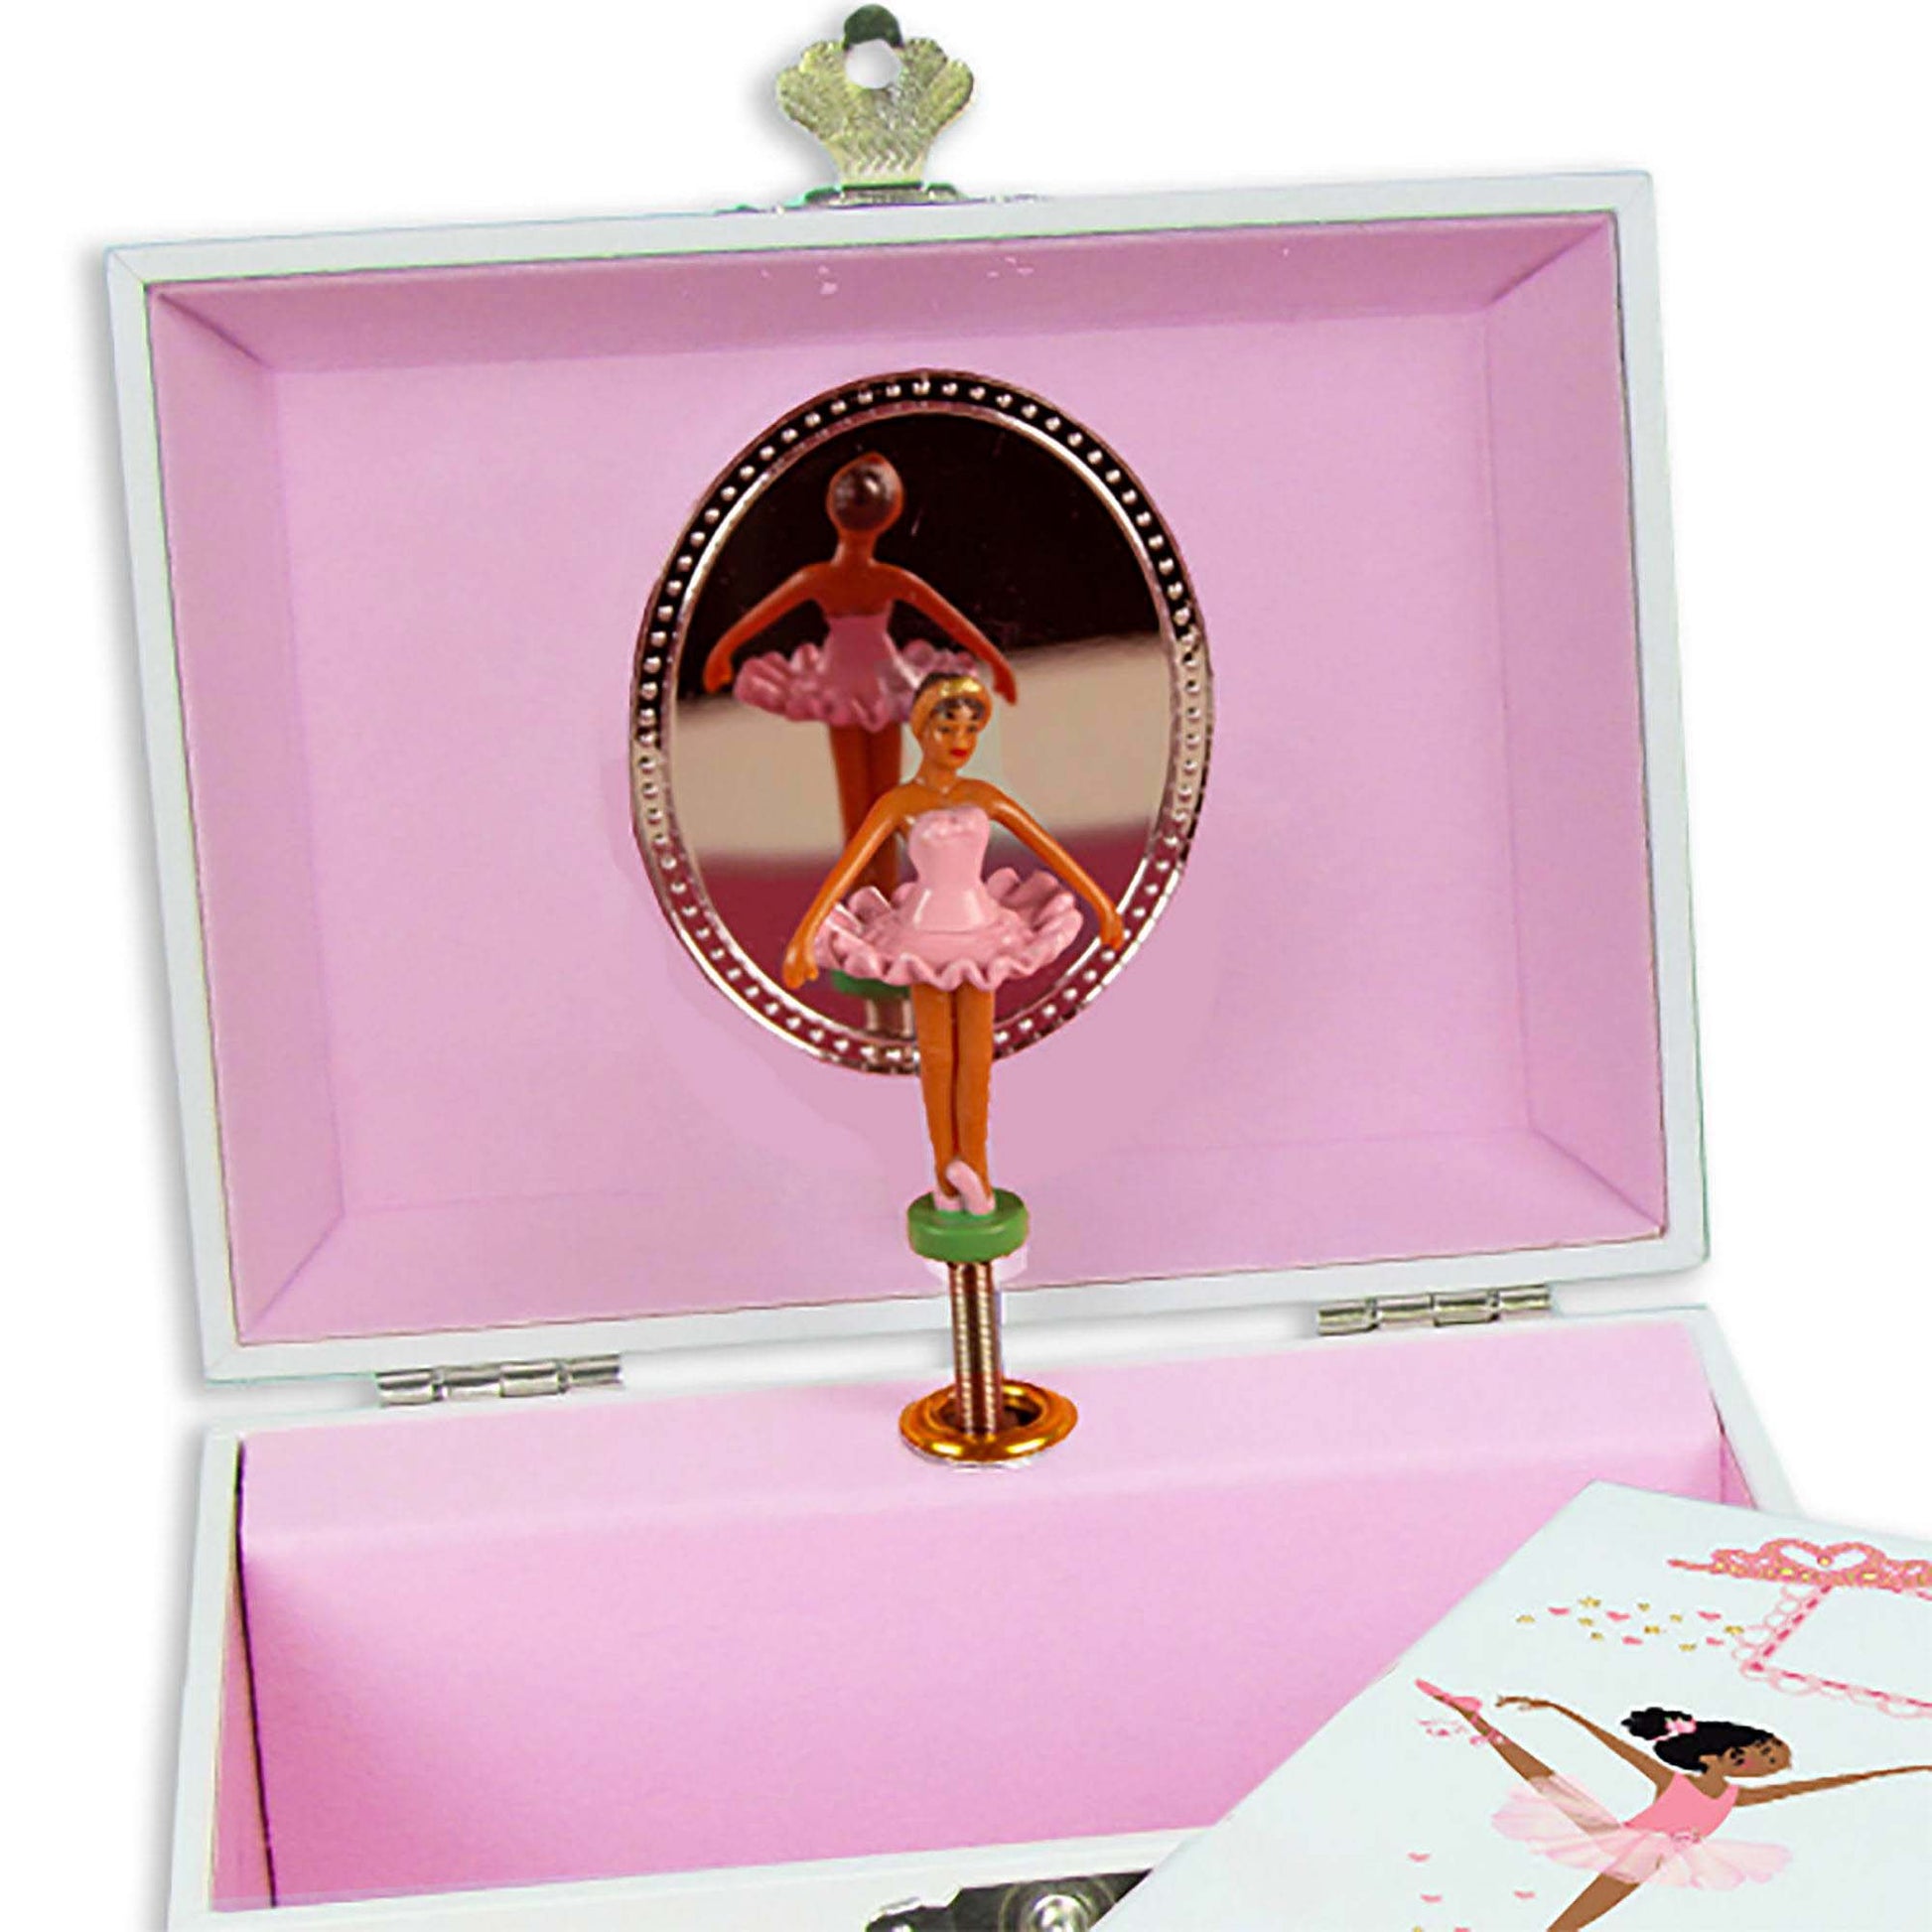 Personalized Ballerina Jewelry Box with Pink Teal Princess Castle design